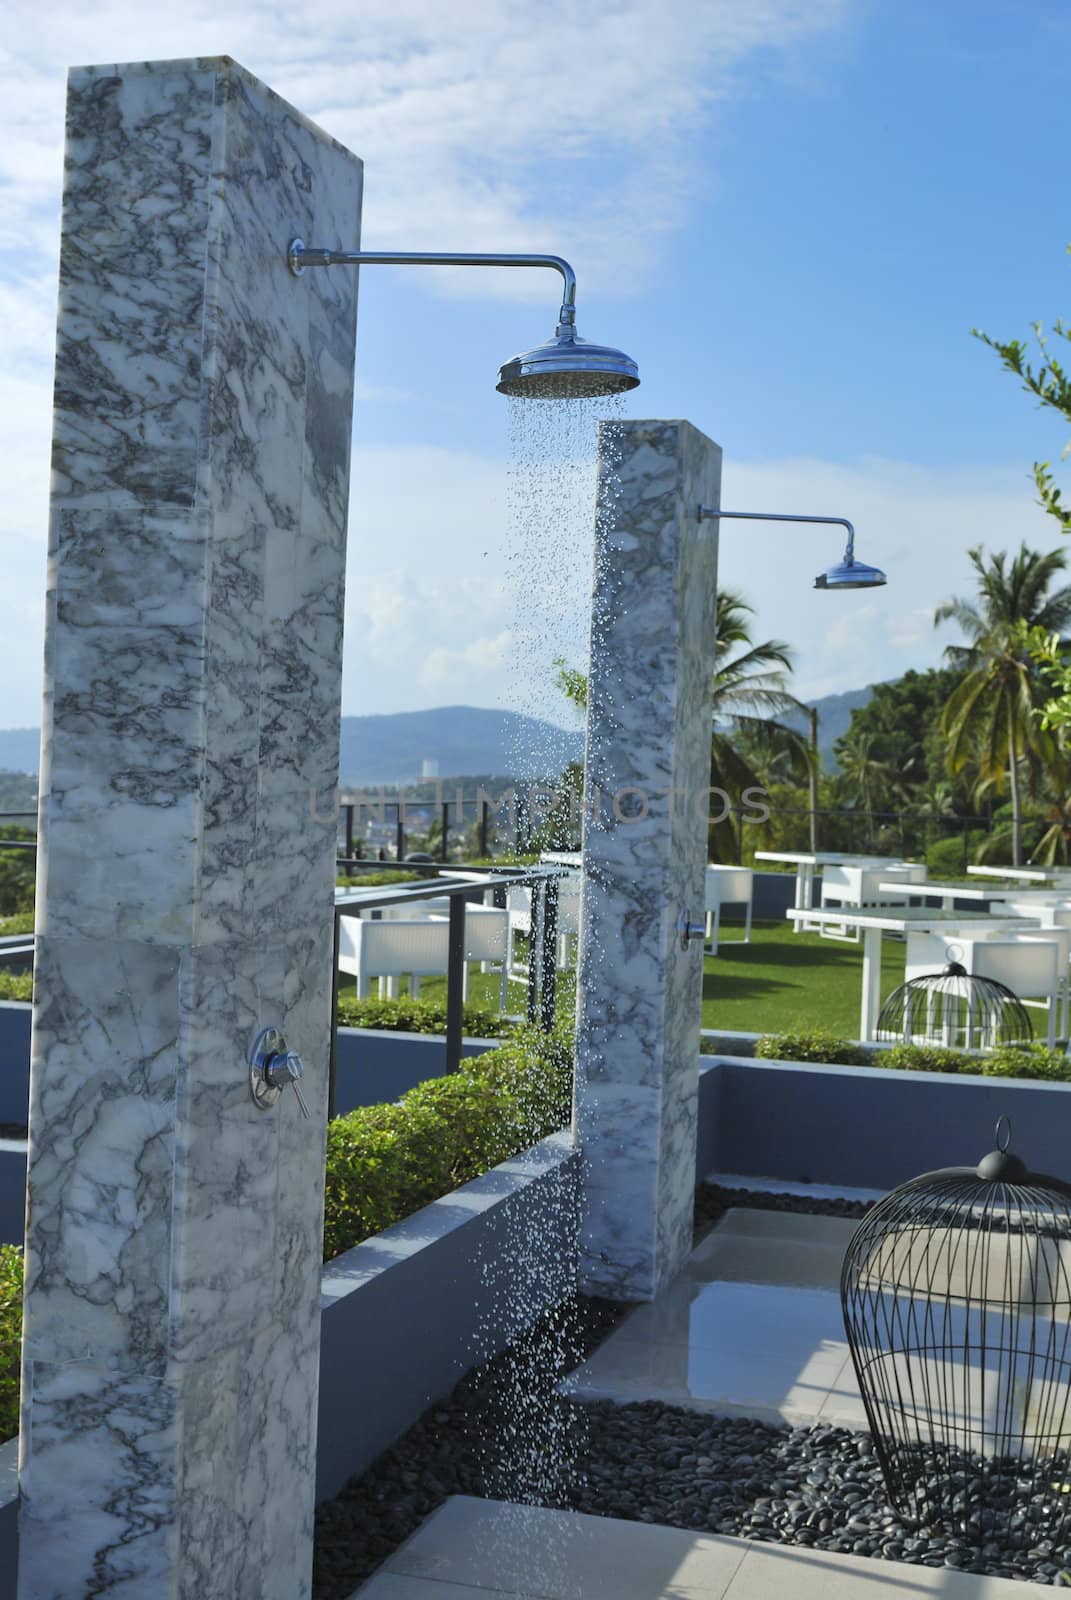 Outdoor shower at swimming pool and beach. The place you get clean after a nice day on the beach.